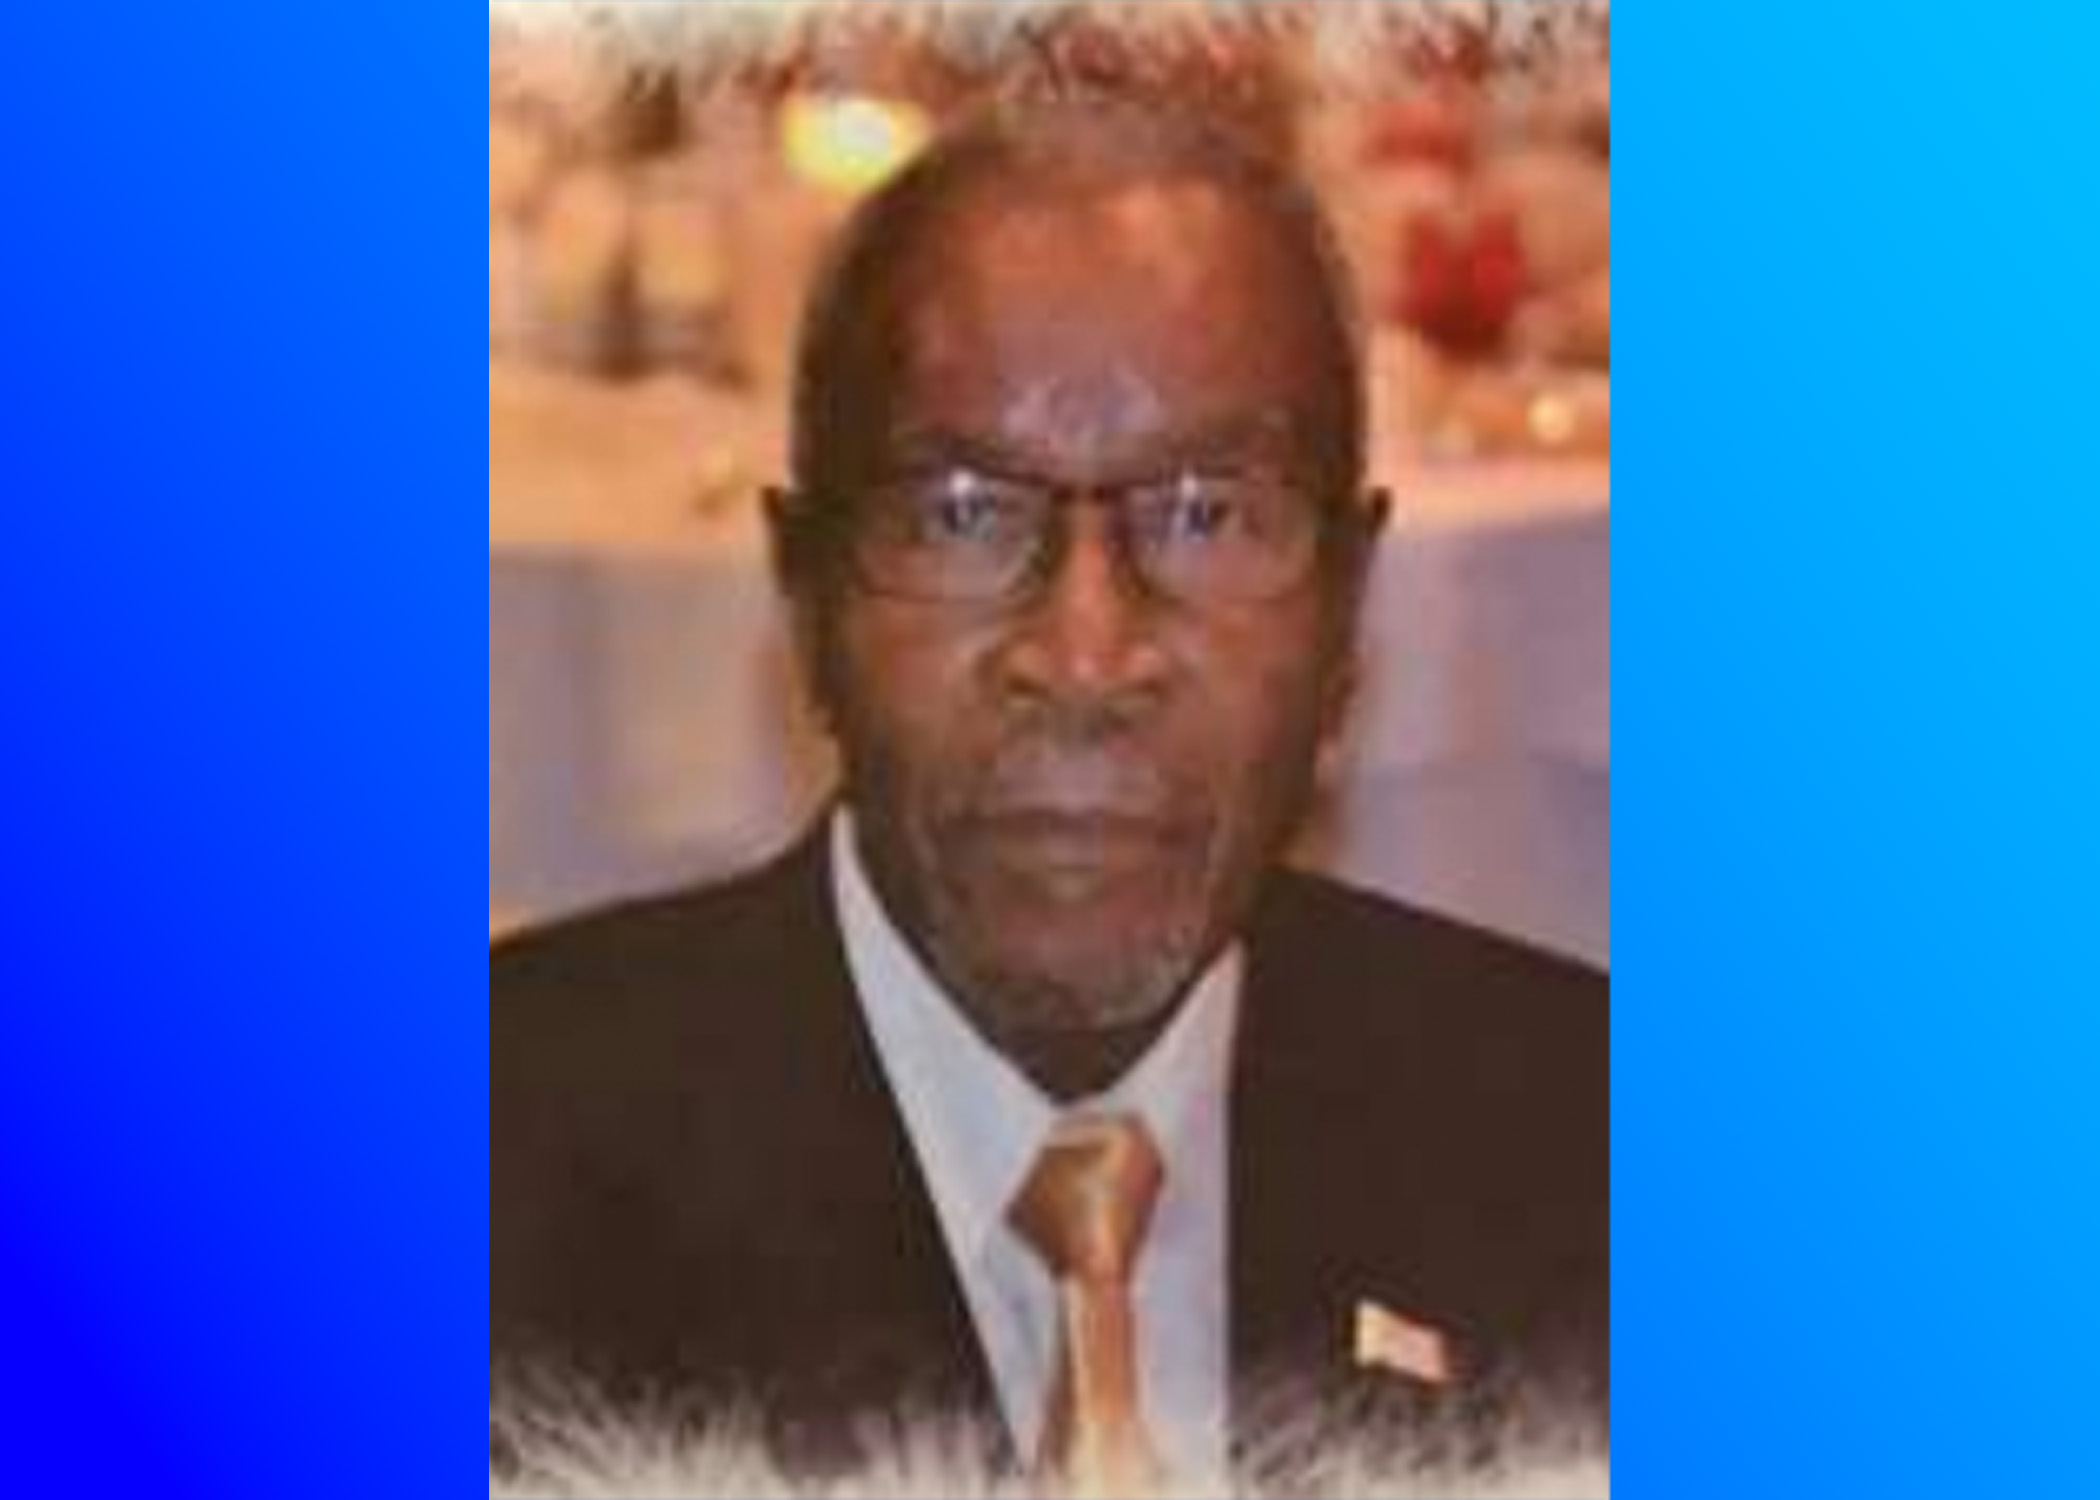 CANCELED: Missing and Endangered Person Alert issued for 92-year-old man